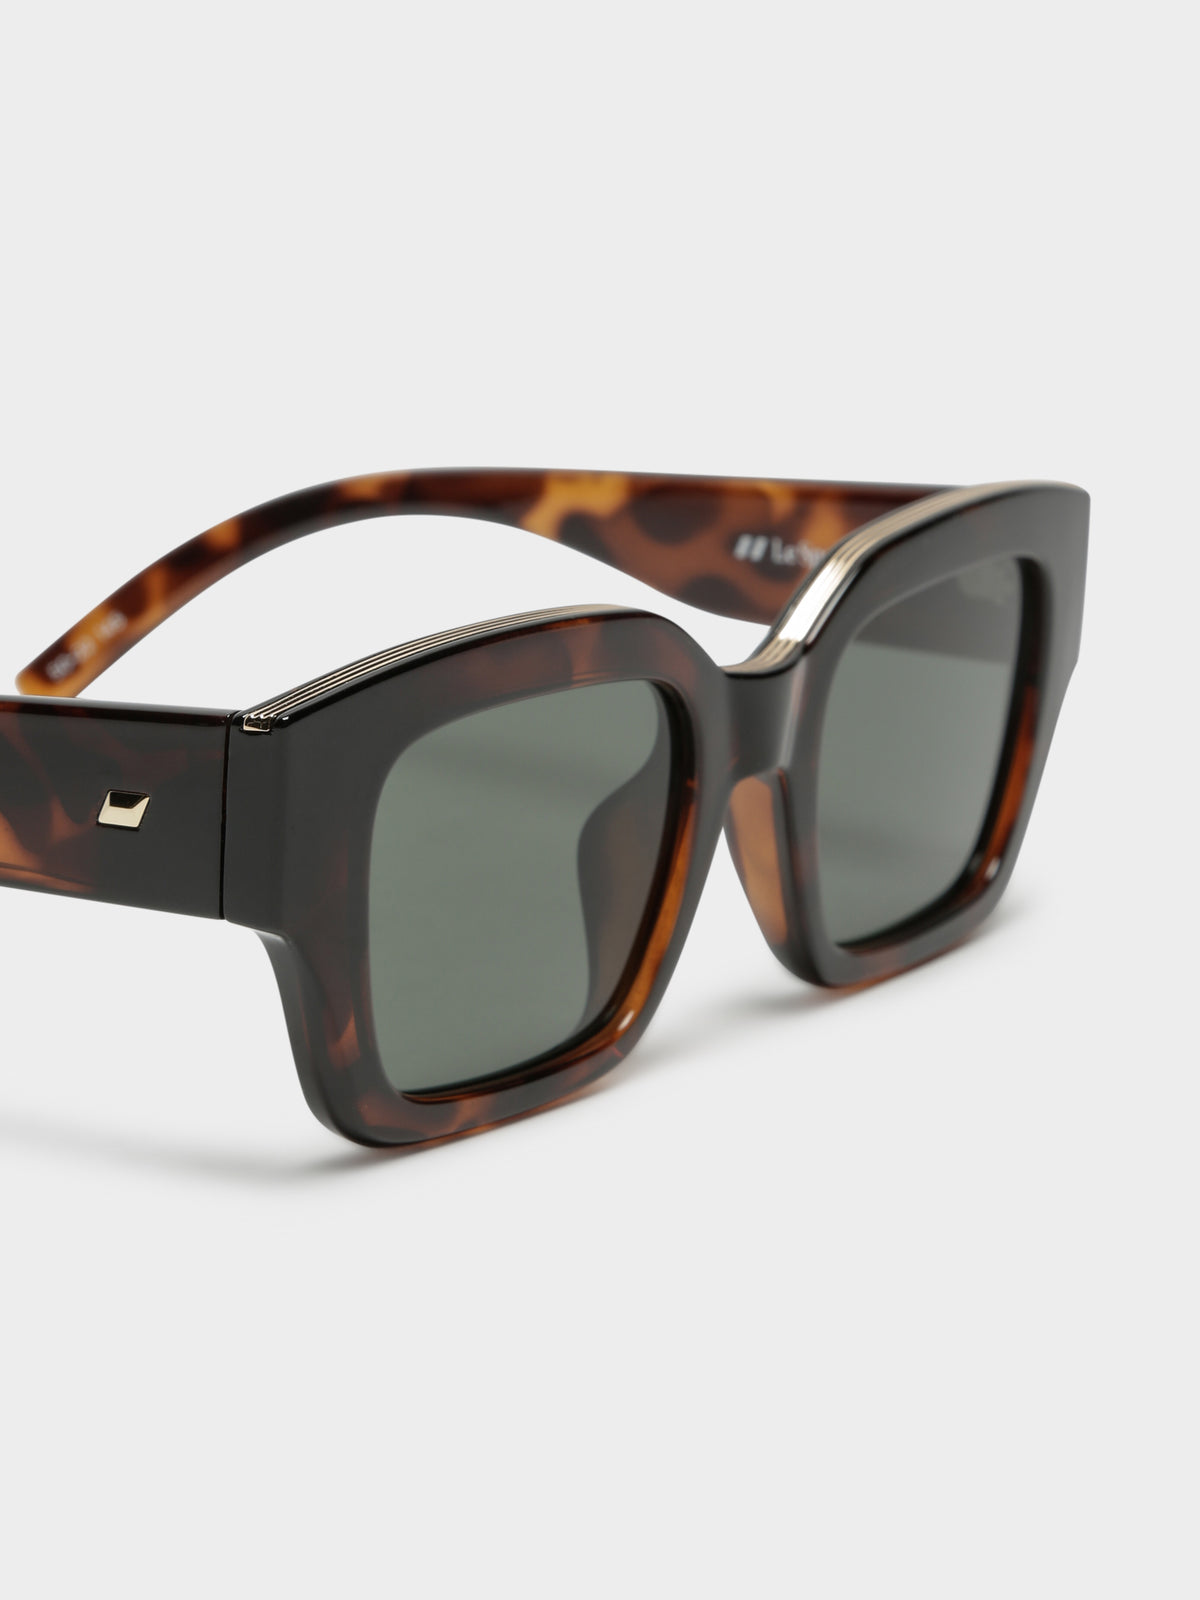 Hypnos Alt Fit Sunglasses in Tort